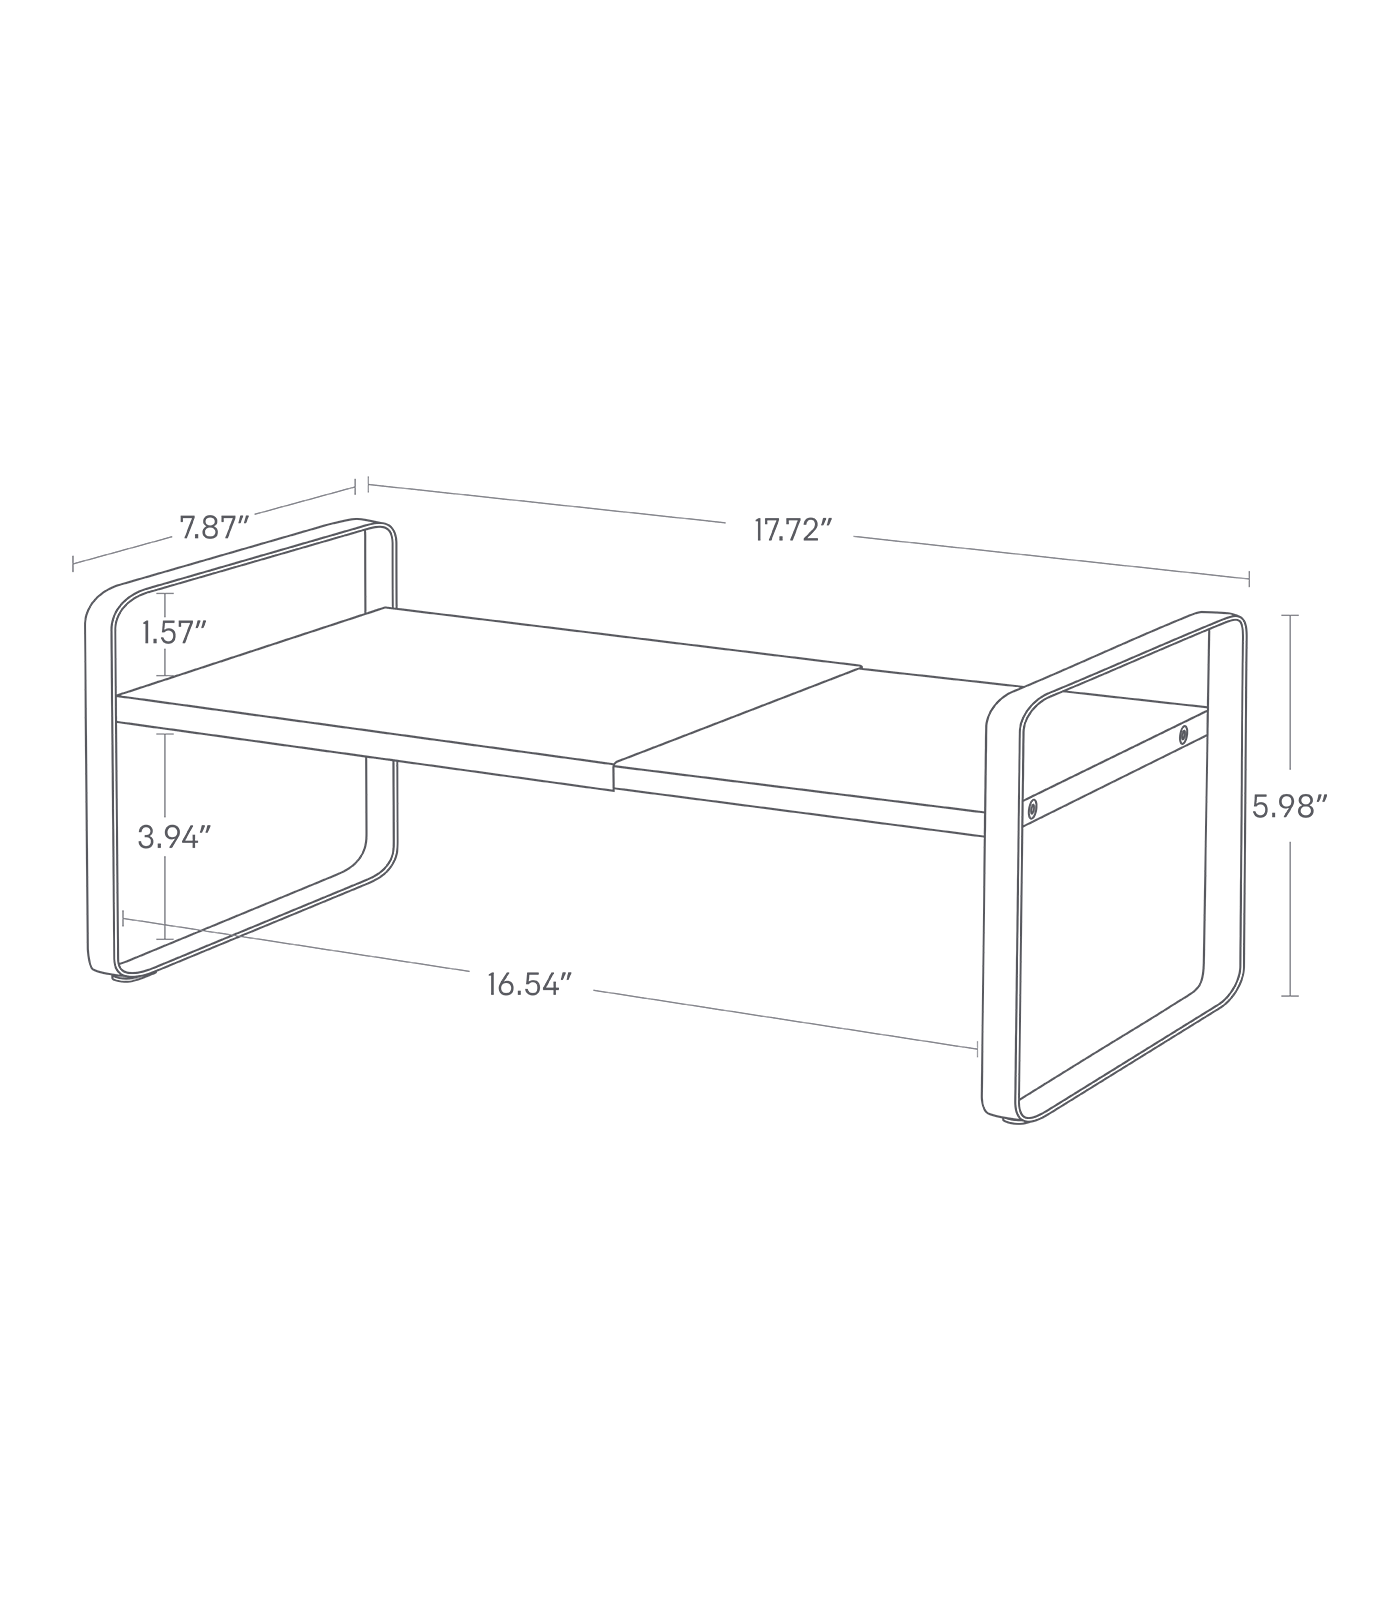 Dimension image for Expandable Countertop Organizer - Two Sizes on a white background including dimensions  L 7.87 x W 10.63 x H 5.98 inches